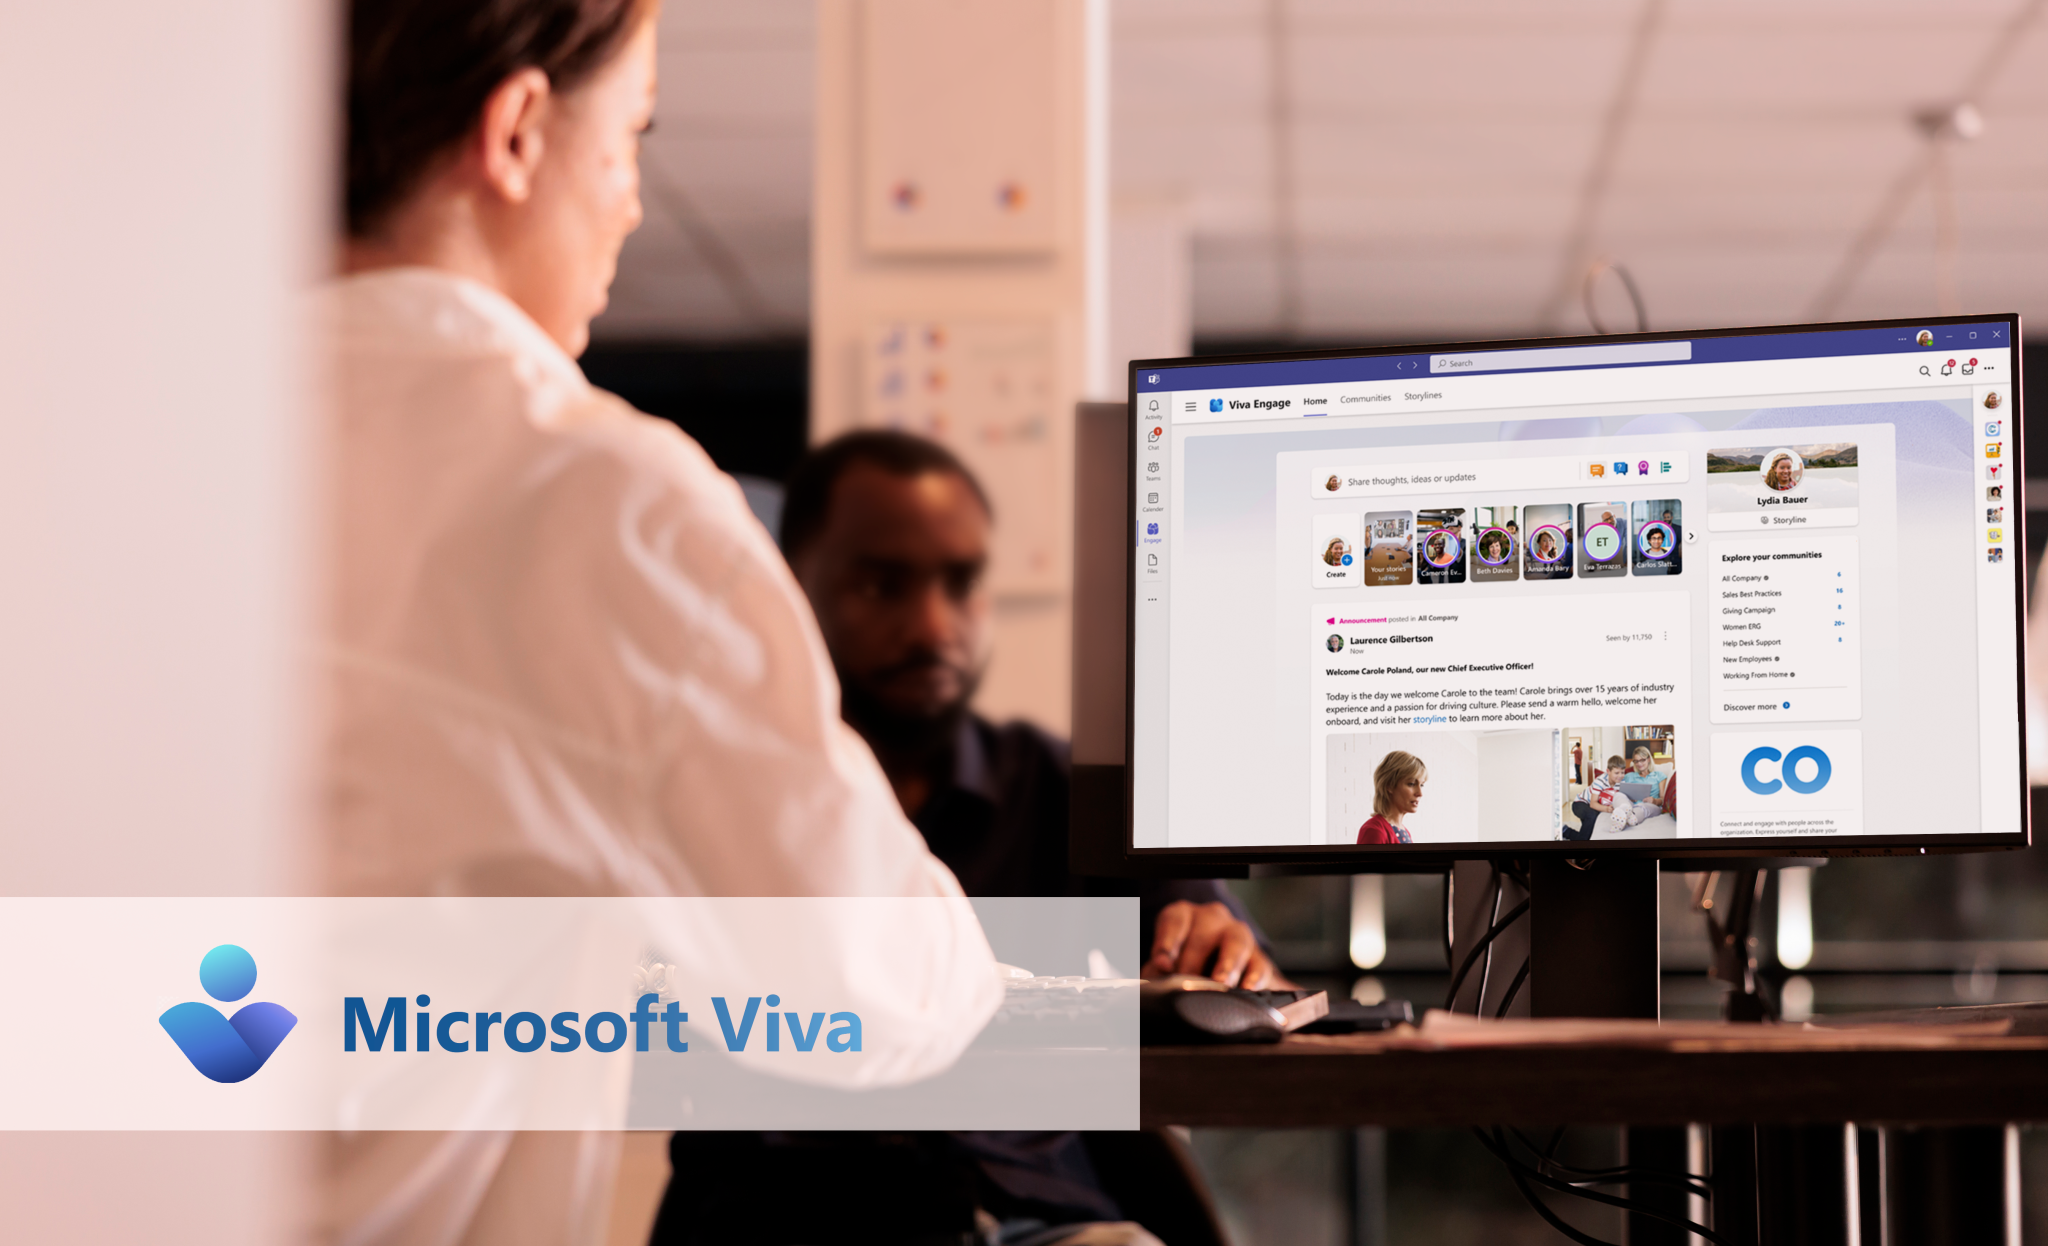 Microsoft Viva applications to enhance the employee experience at every level.